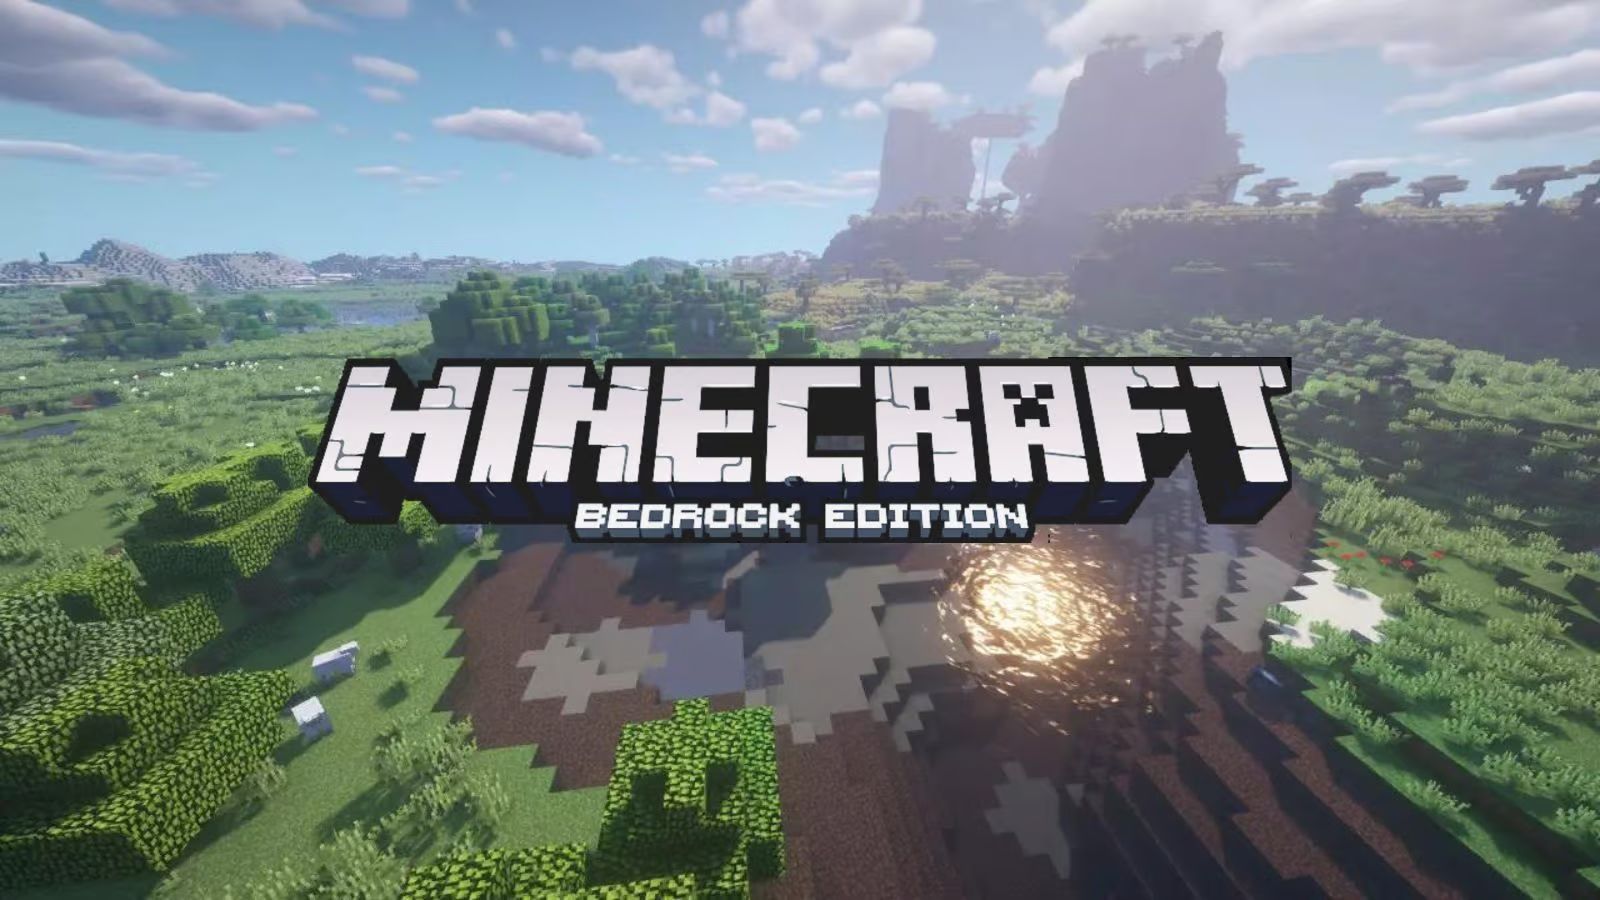 How To Download Bedrock Edition On PC